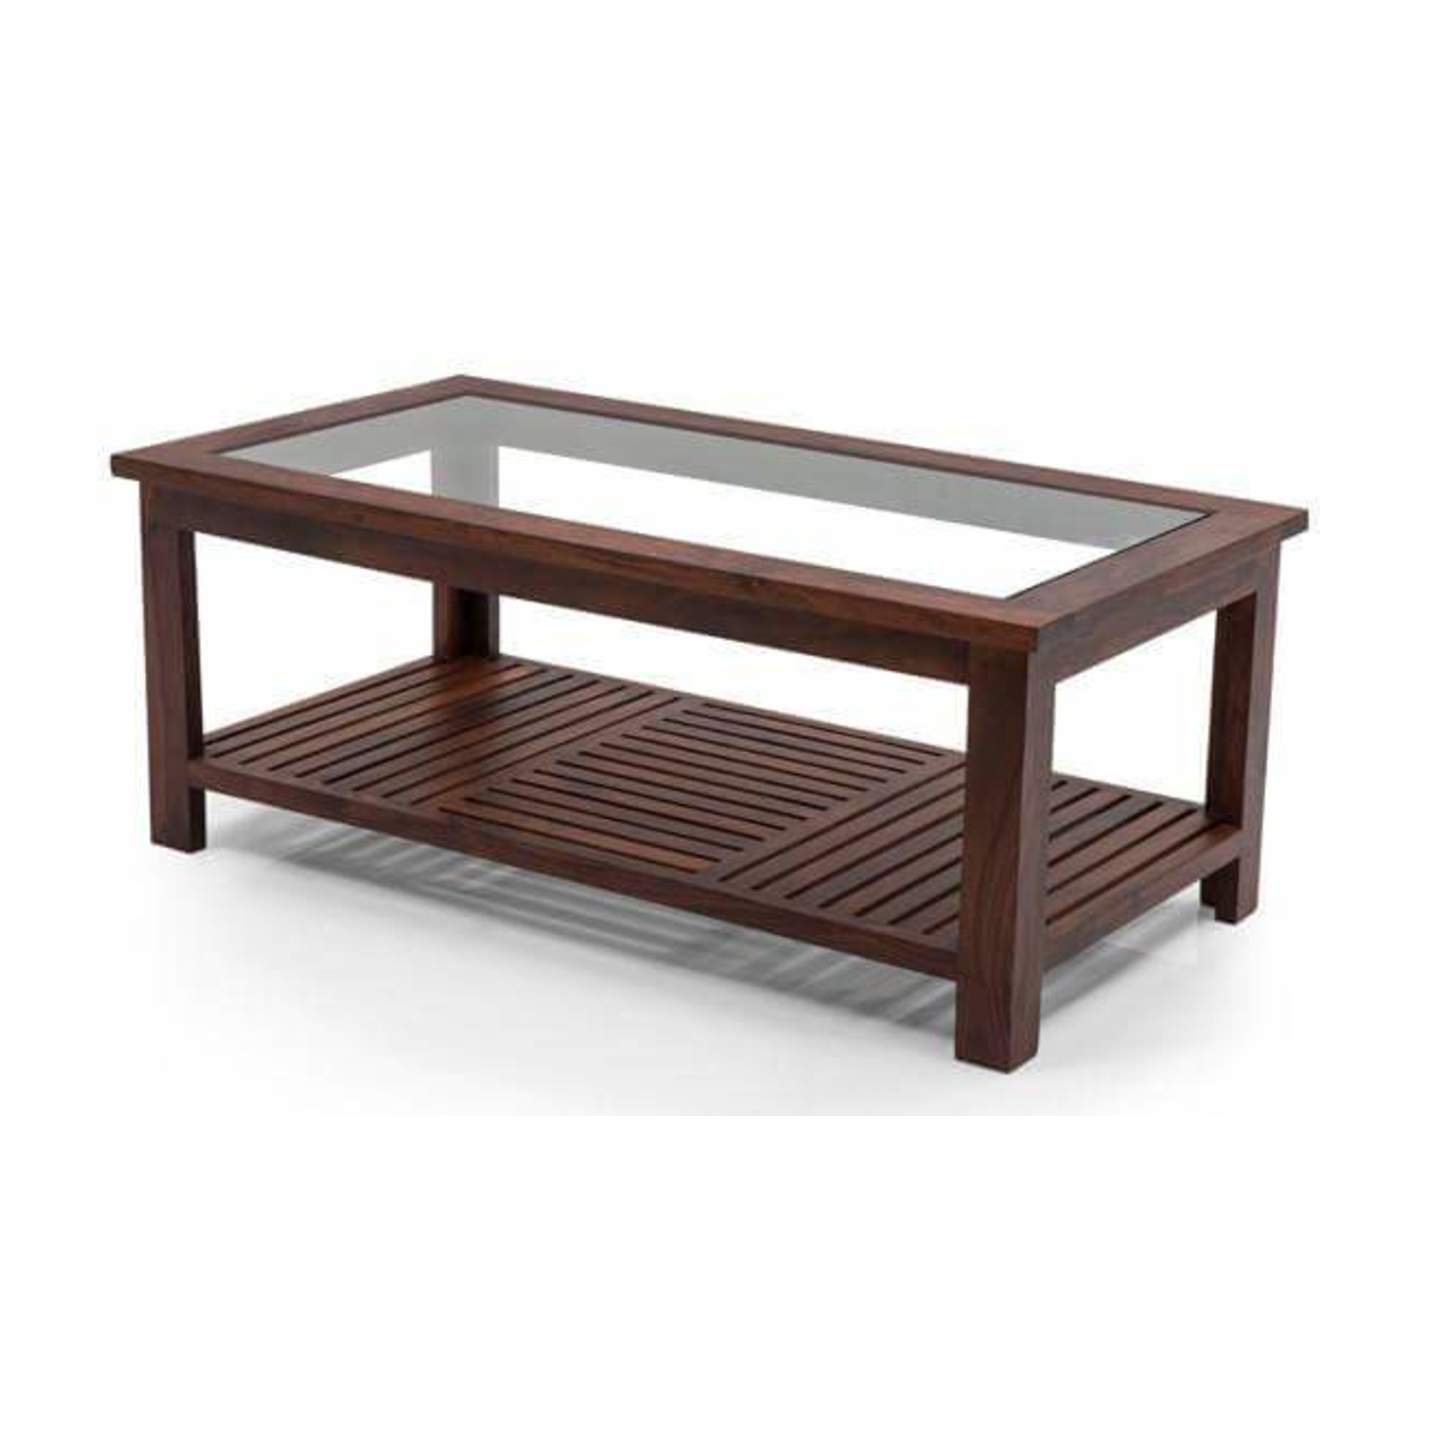 DW Center Table C-012 Wooden Patti In Brown Colour